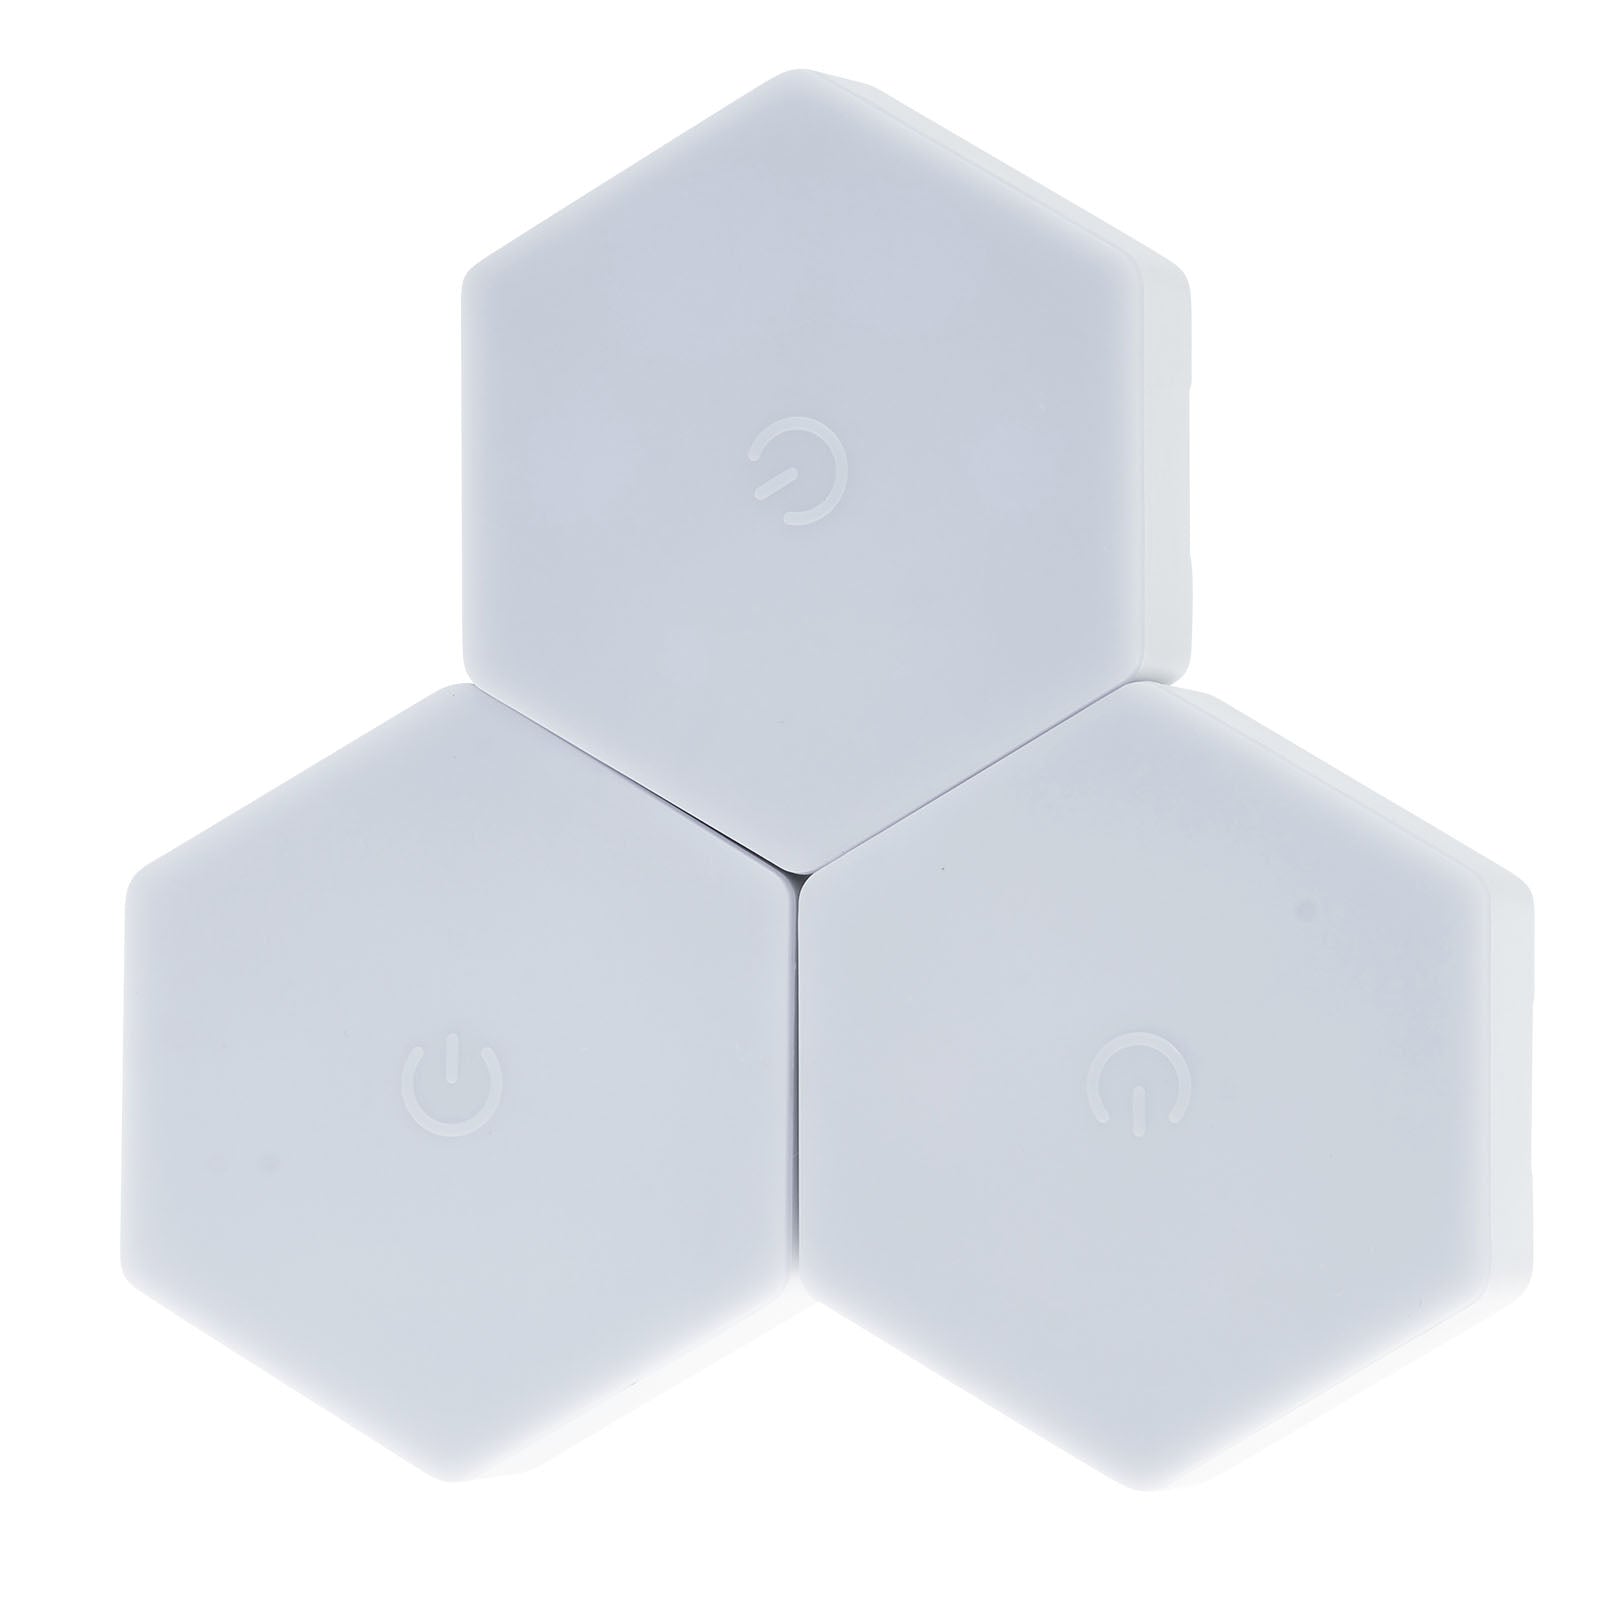 LitezAll Wireless Hexagon Lights with Remote Control 3 Pack - LitezAll - Home Accents - 1